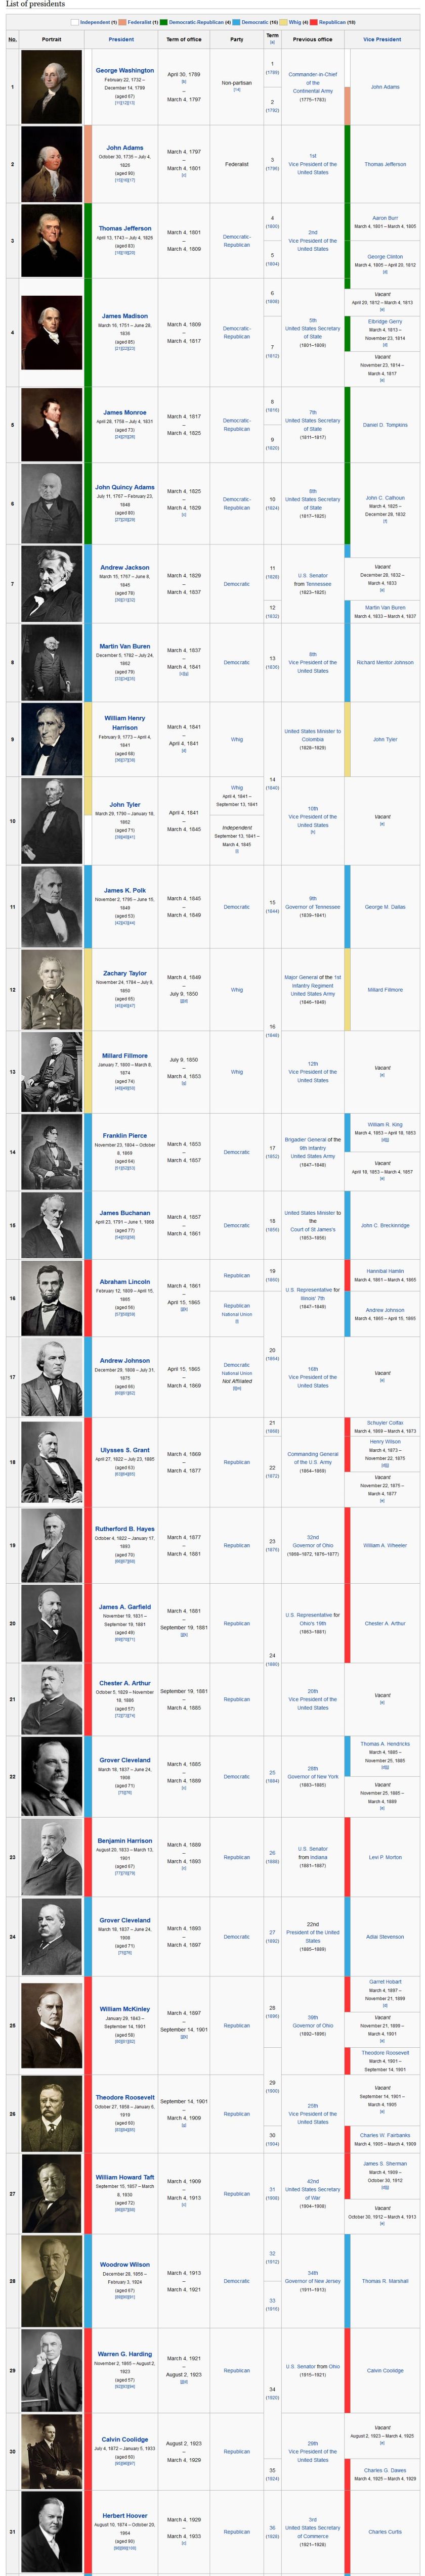 List of Presidents of the United States -11